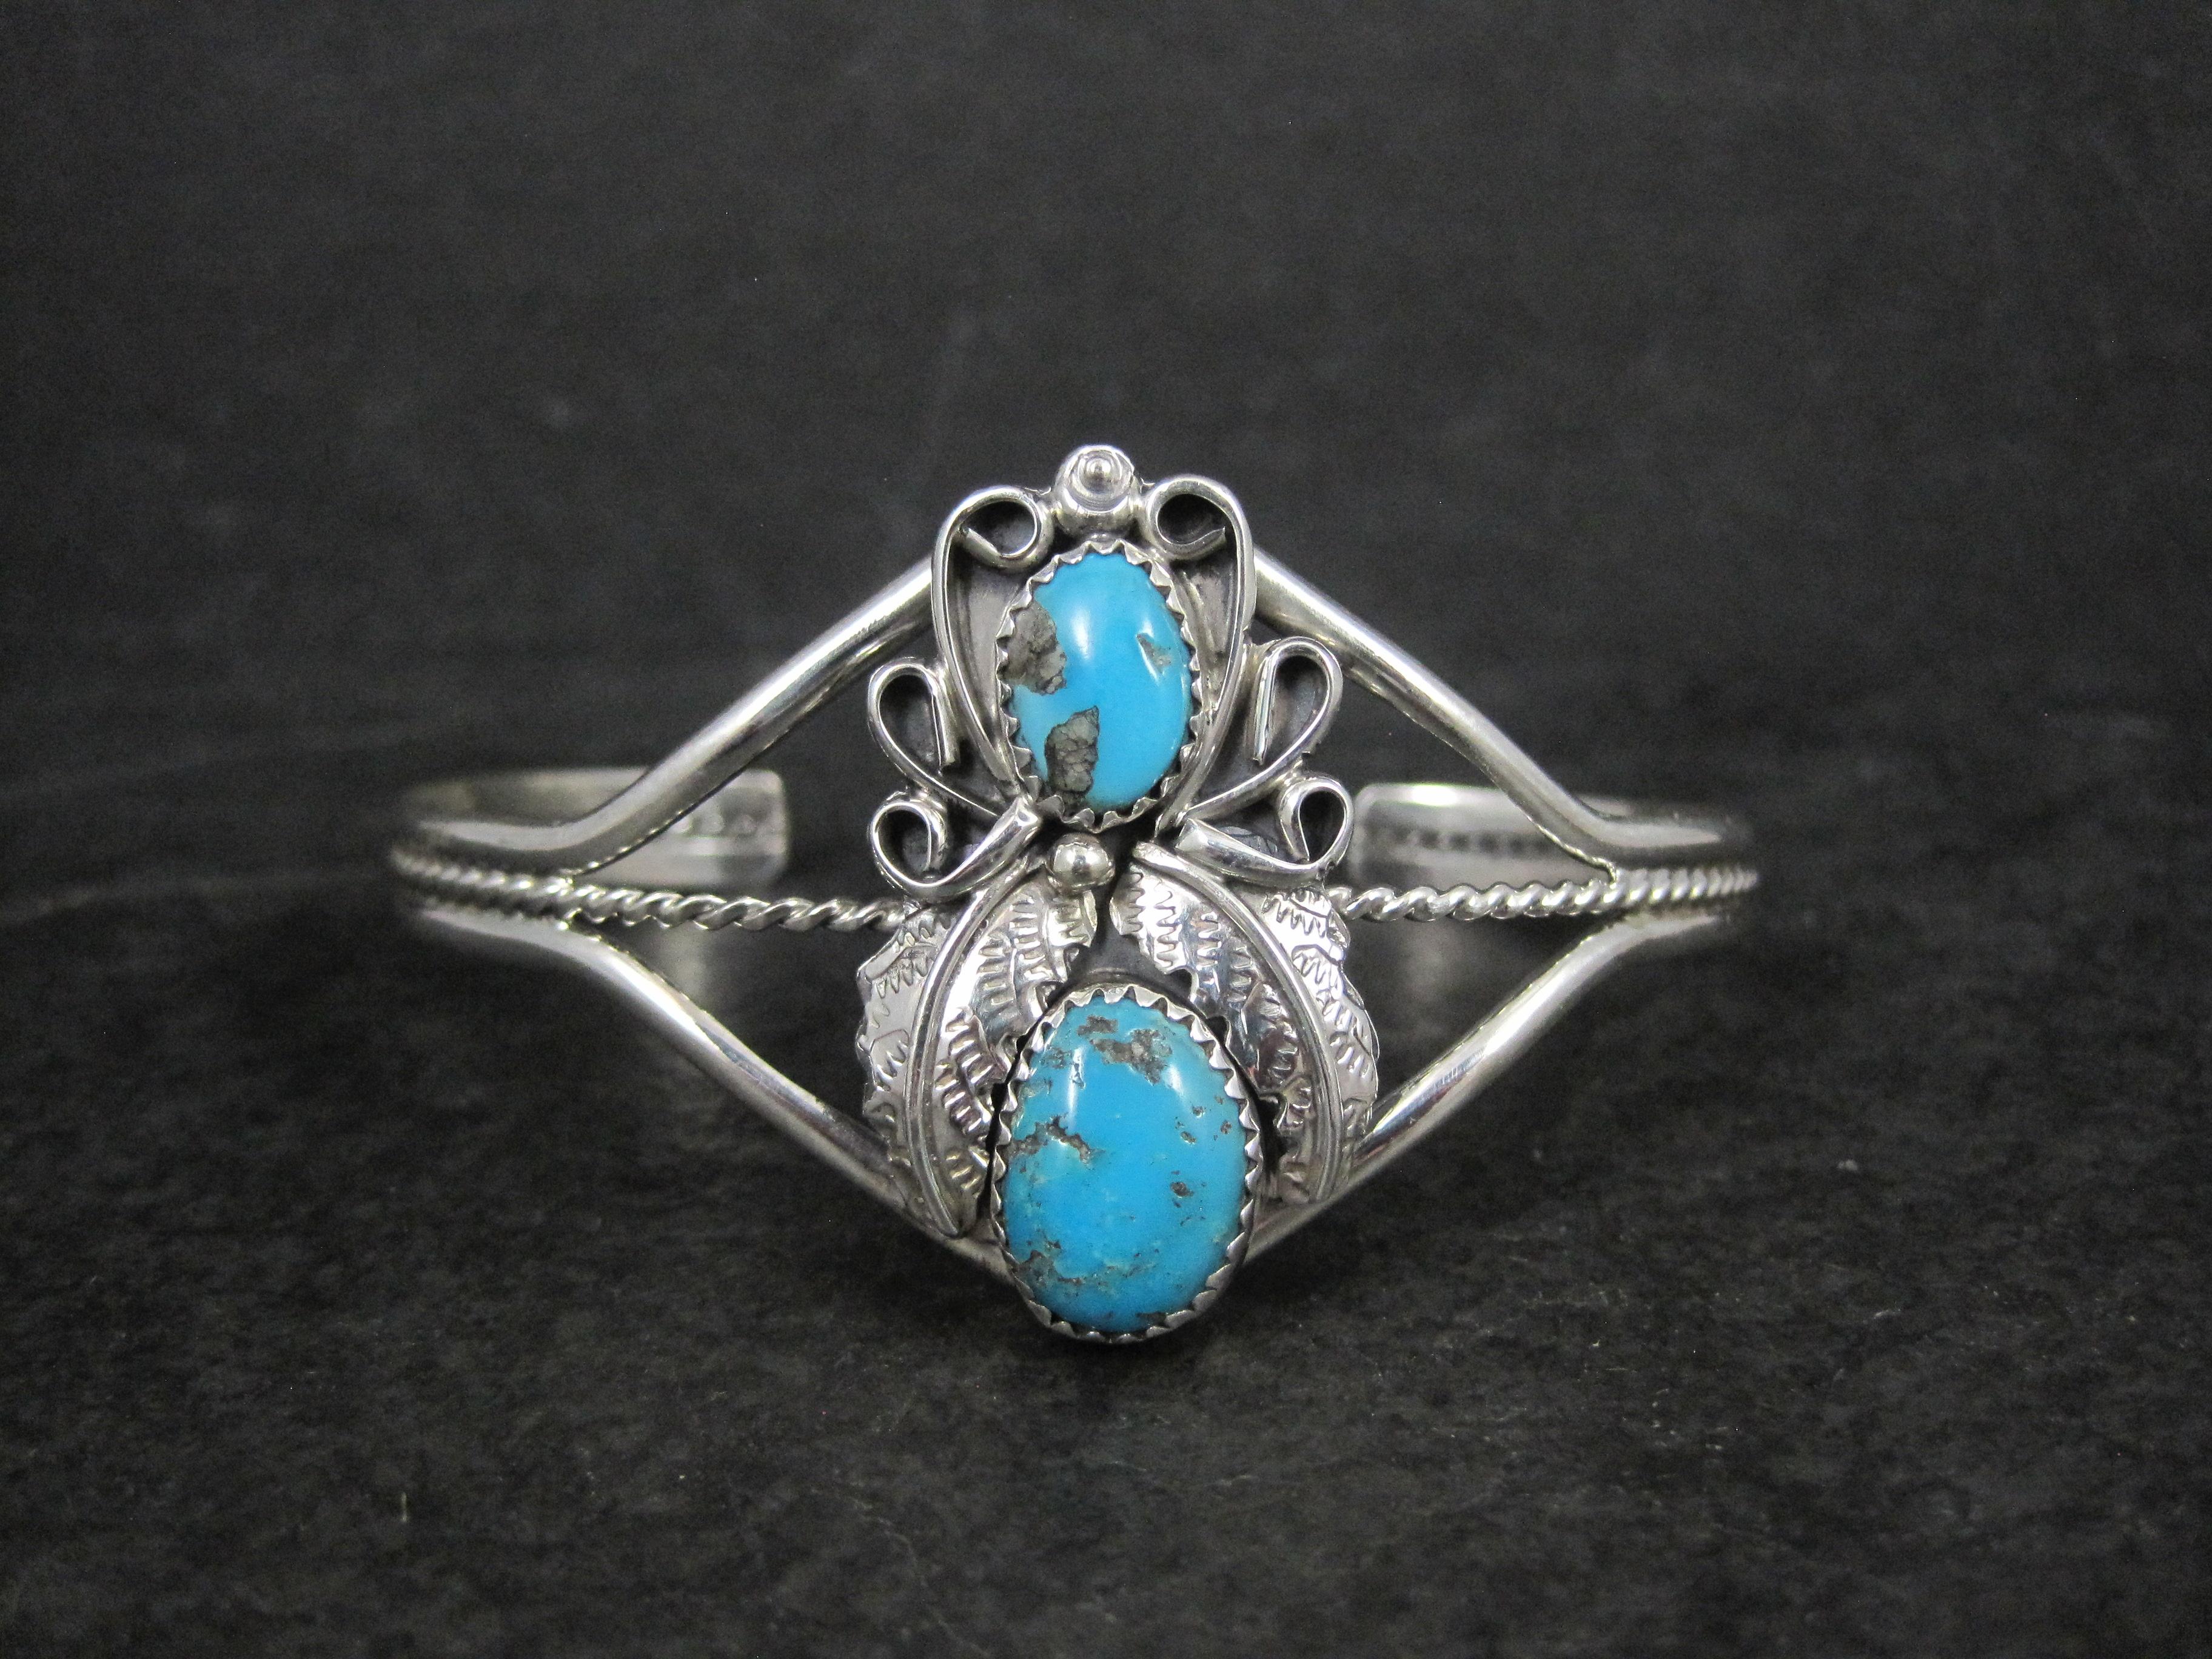 This gorgeous cuff bracelet is sterling silver with genuine turquoise gemstones.
It is the creation of Navajo silversmith Harry B Yazzie.

The face of this cuff bracelet measures 1 5/16 inches north to south.
It has an inner circumference of 6 1/4